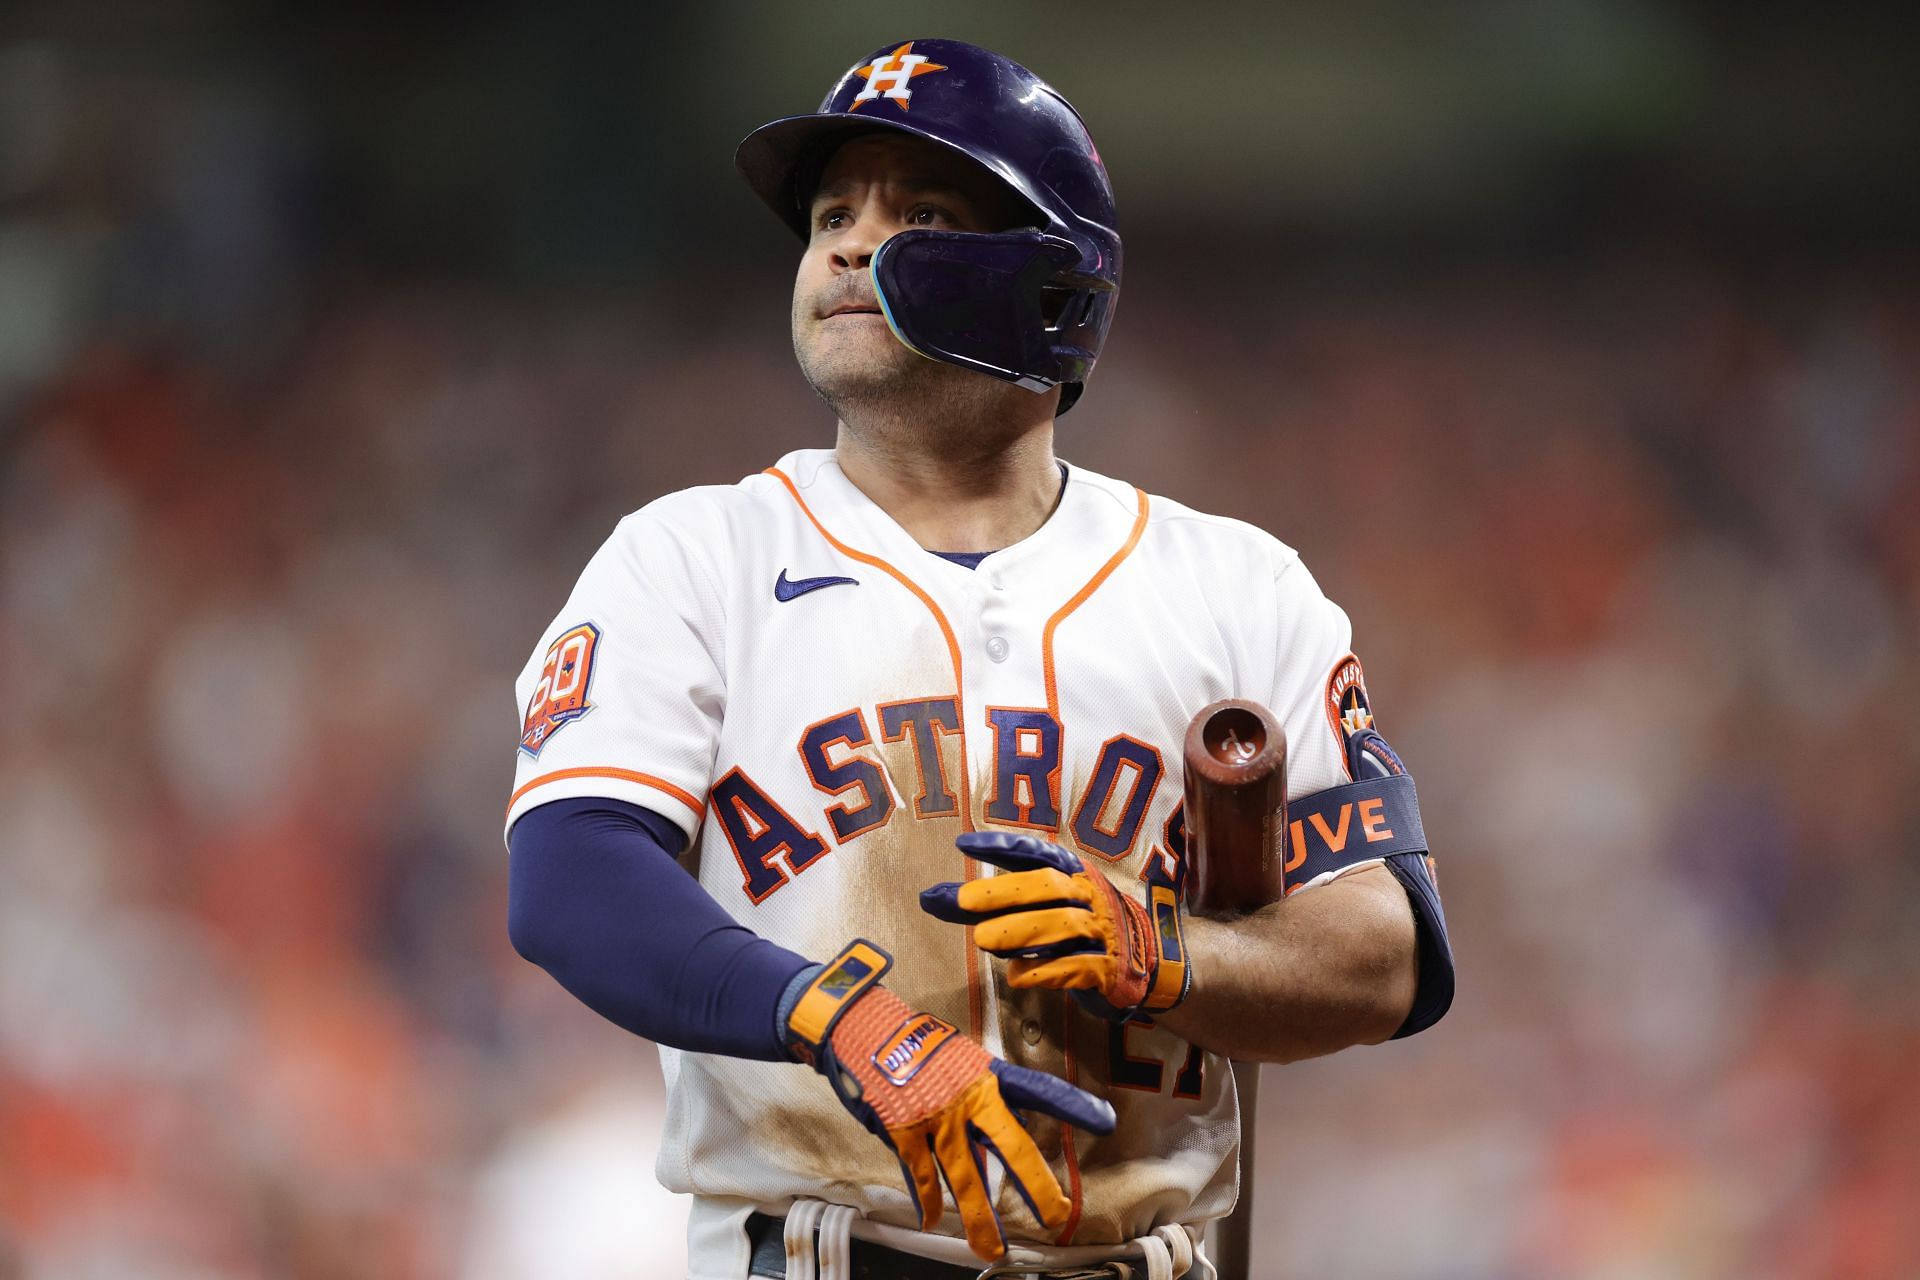 Jose Altuve reacts after striking out against the Seattle Mariners at Minute Maid Park